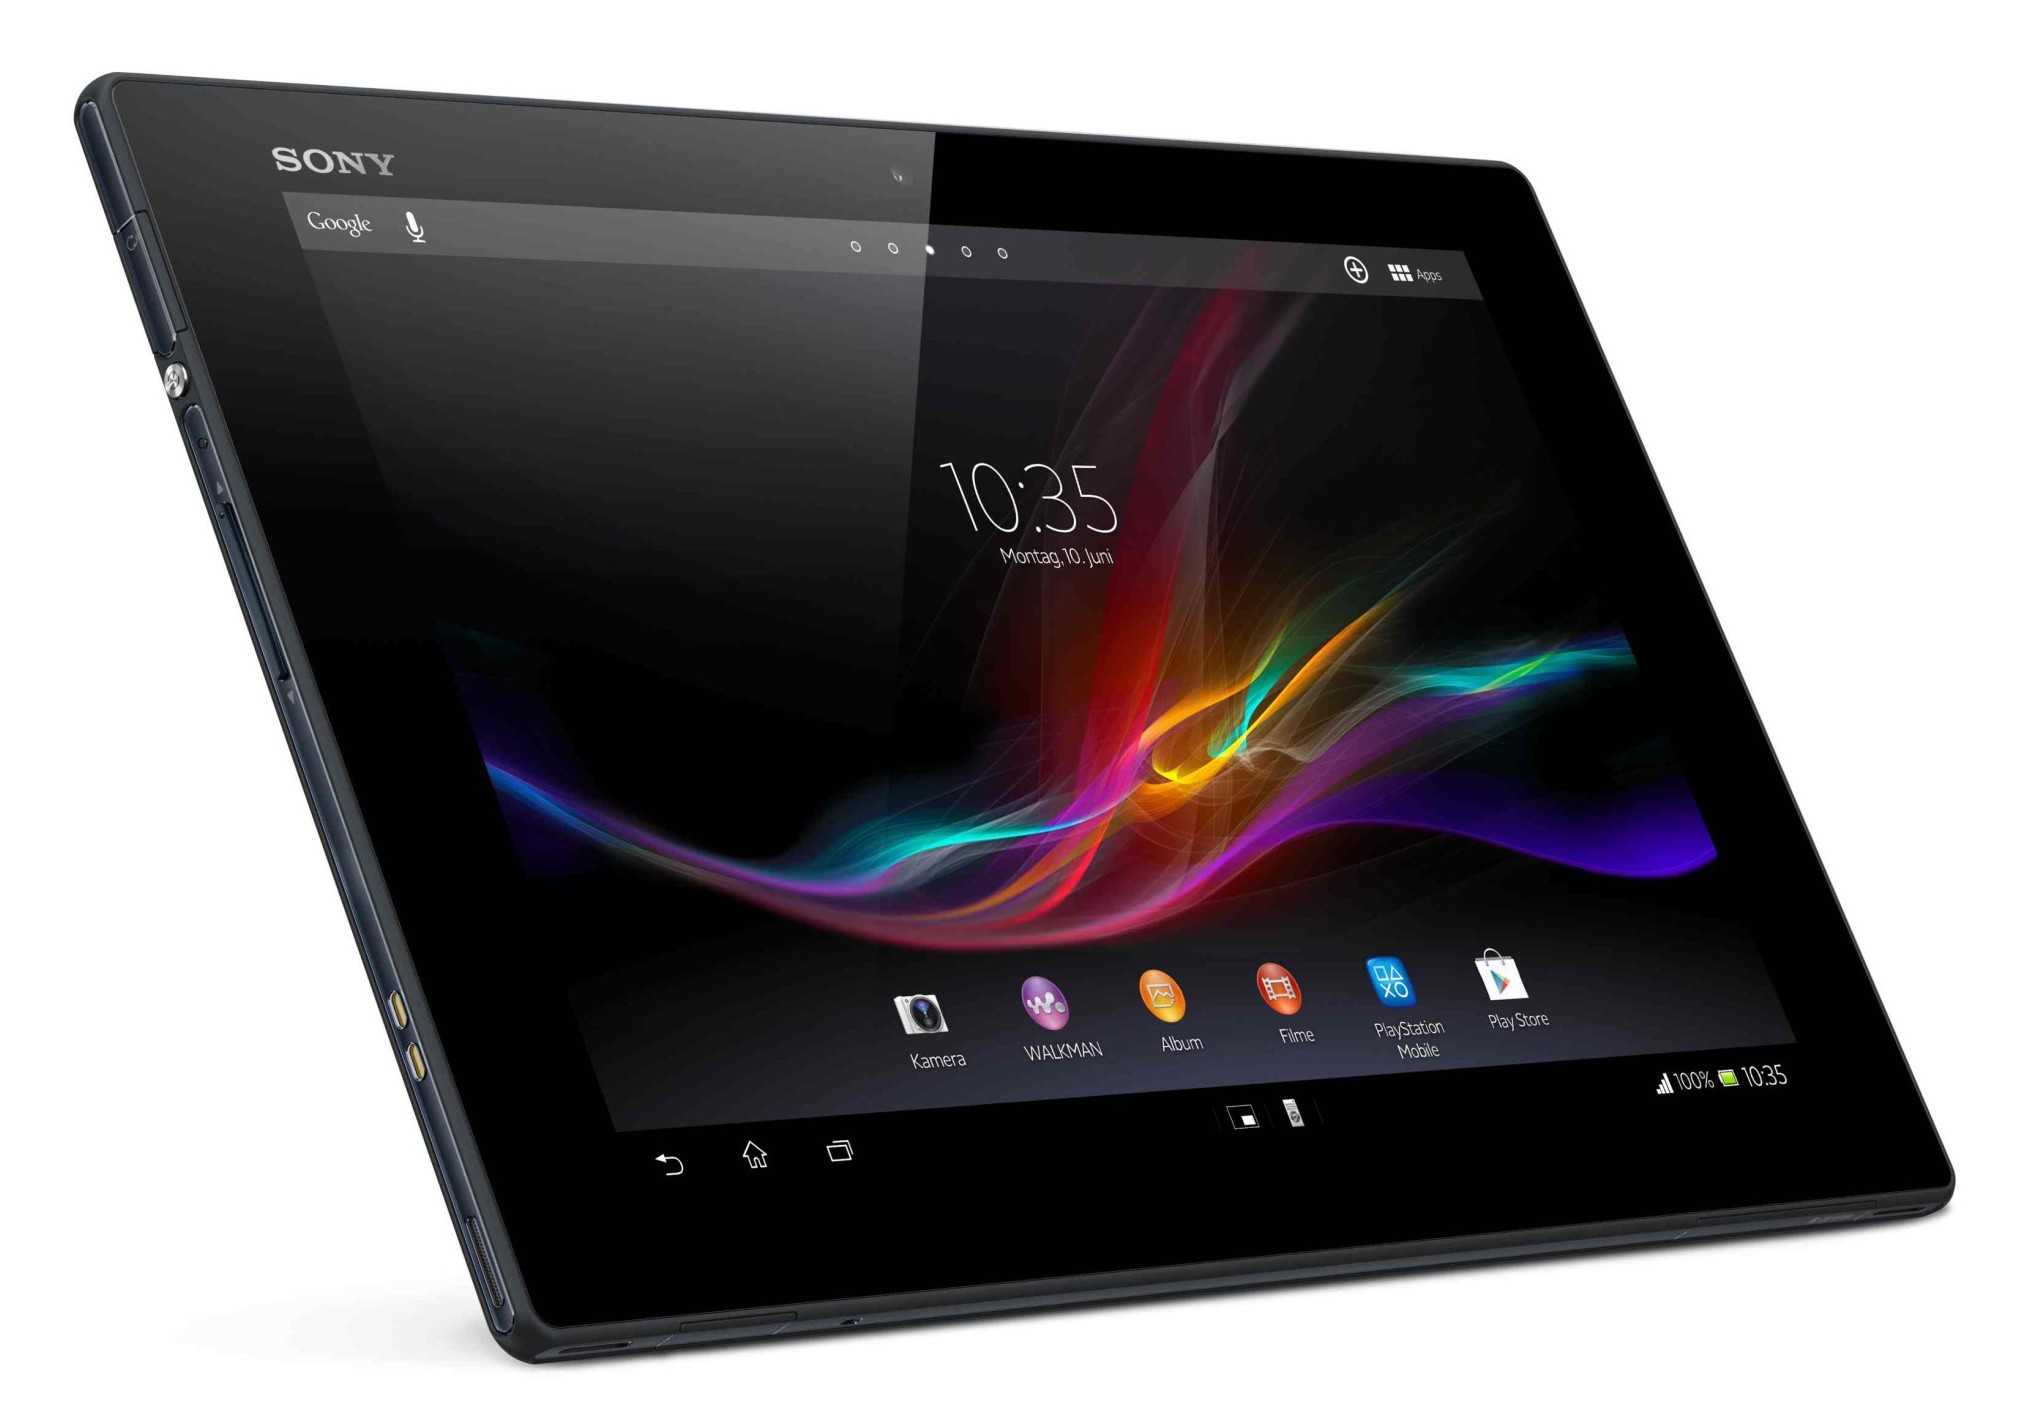 Sony Xperia Z4 Tablet Ultra Specs Leak 12 9 Inch Display Snapdragon 810 And 6gb Of Ram